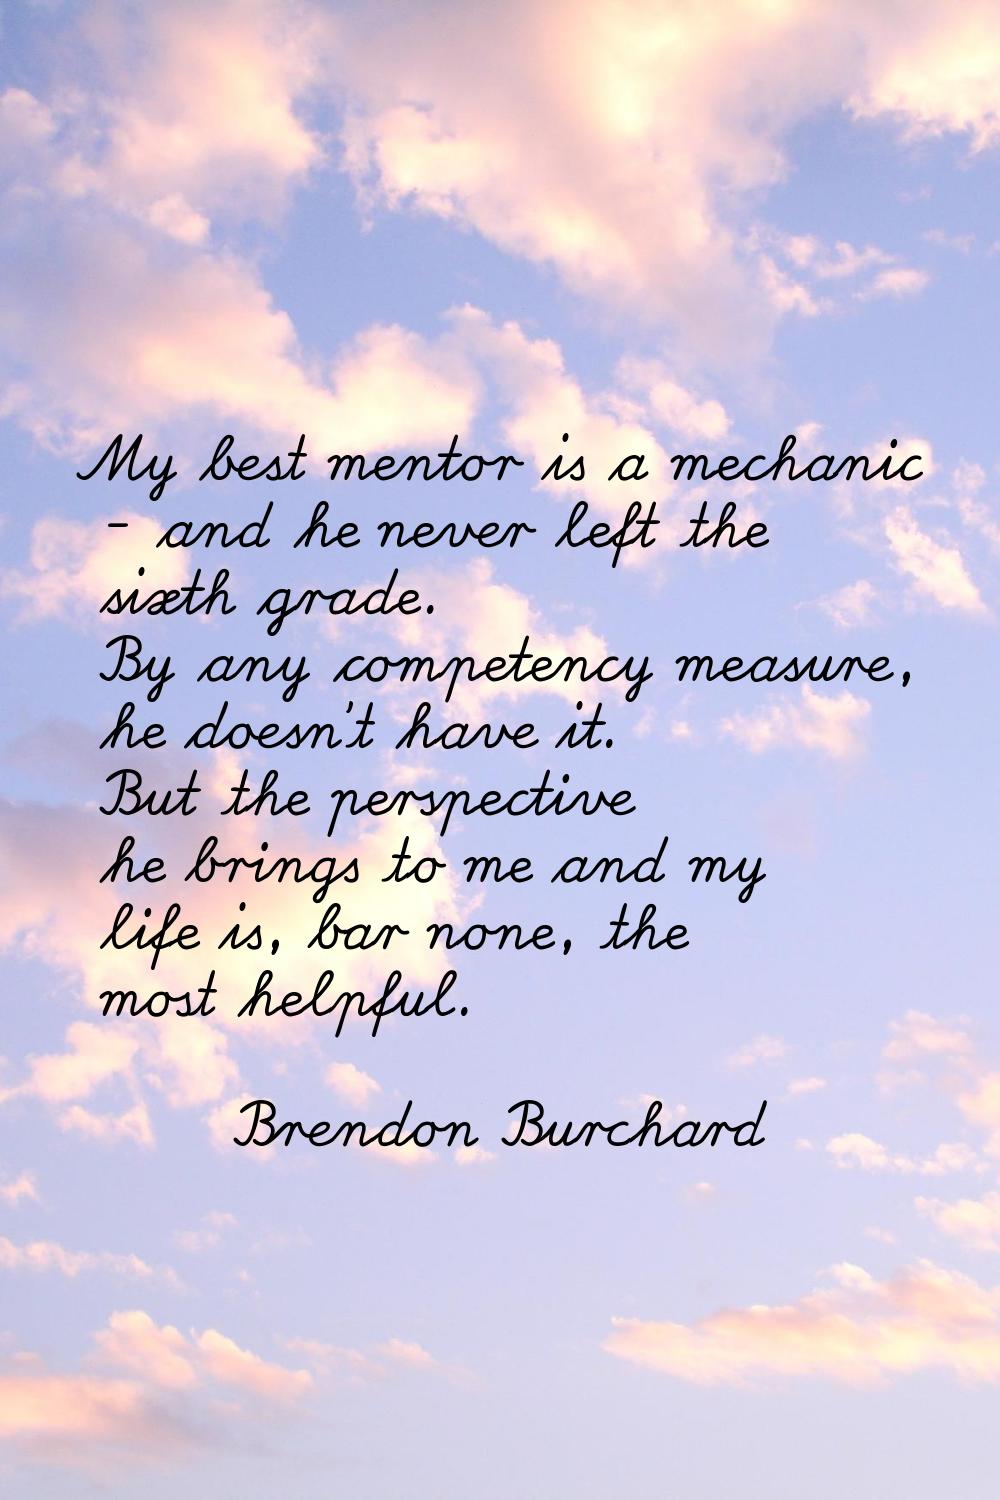 My best mentor is a mechanic - and he never left the sixth grade. By any competency measure, he doe